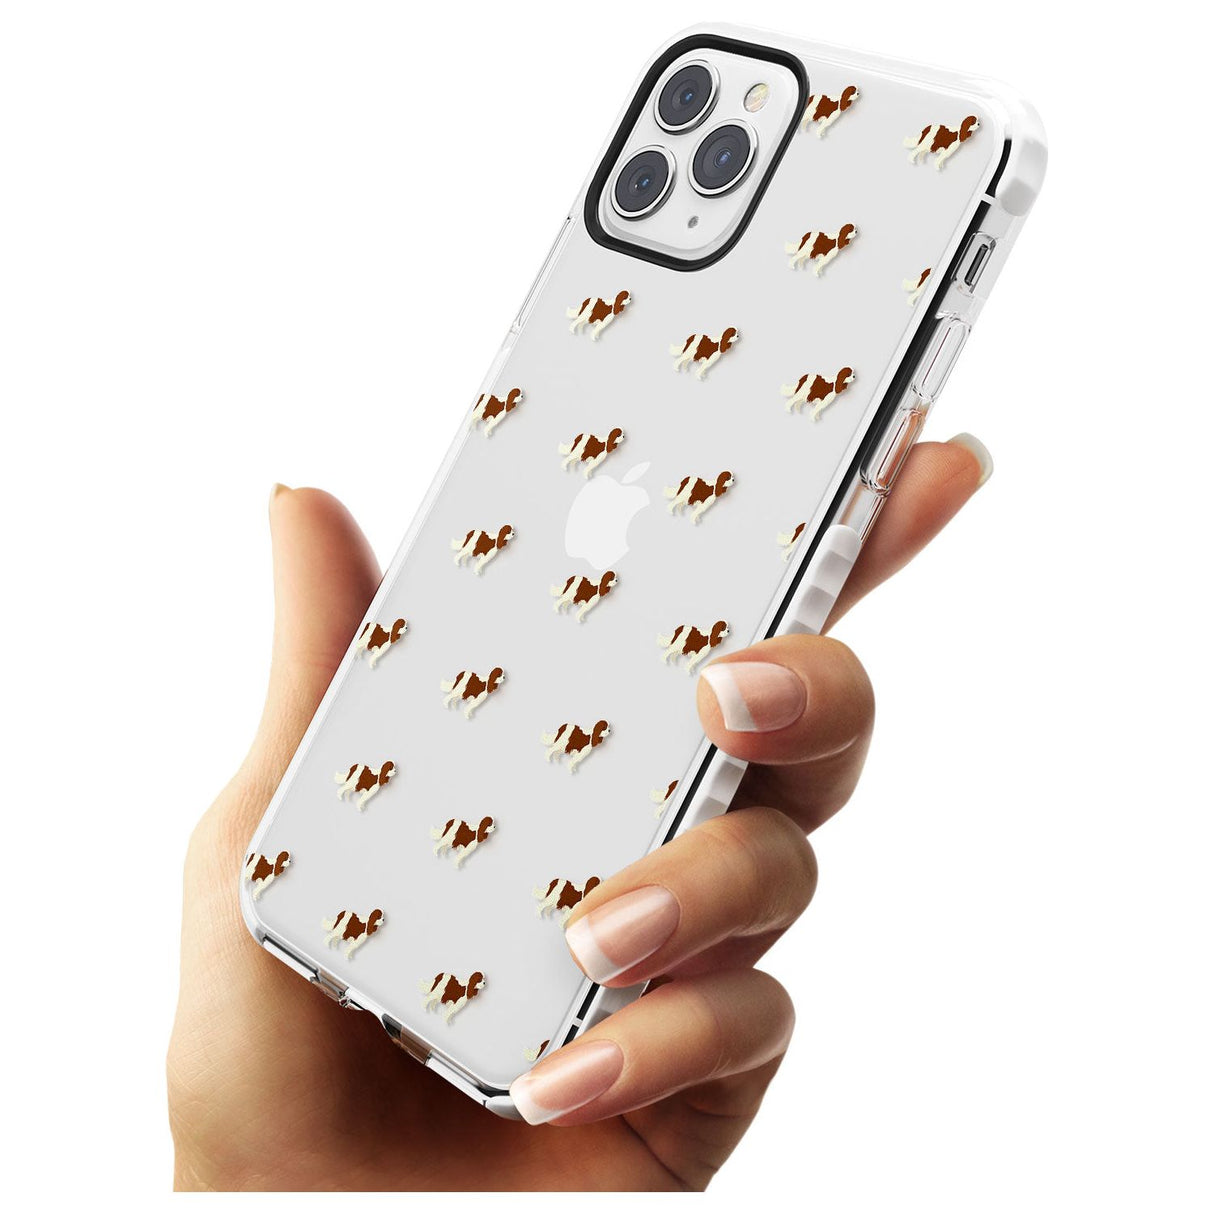 Cavalier King Charles Spaniel Pattern Clear Impact Phone Case for iPhone 11 Pro Max